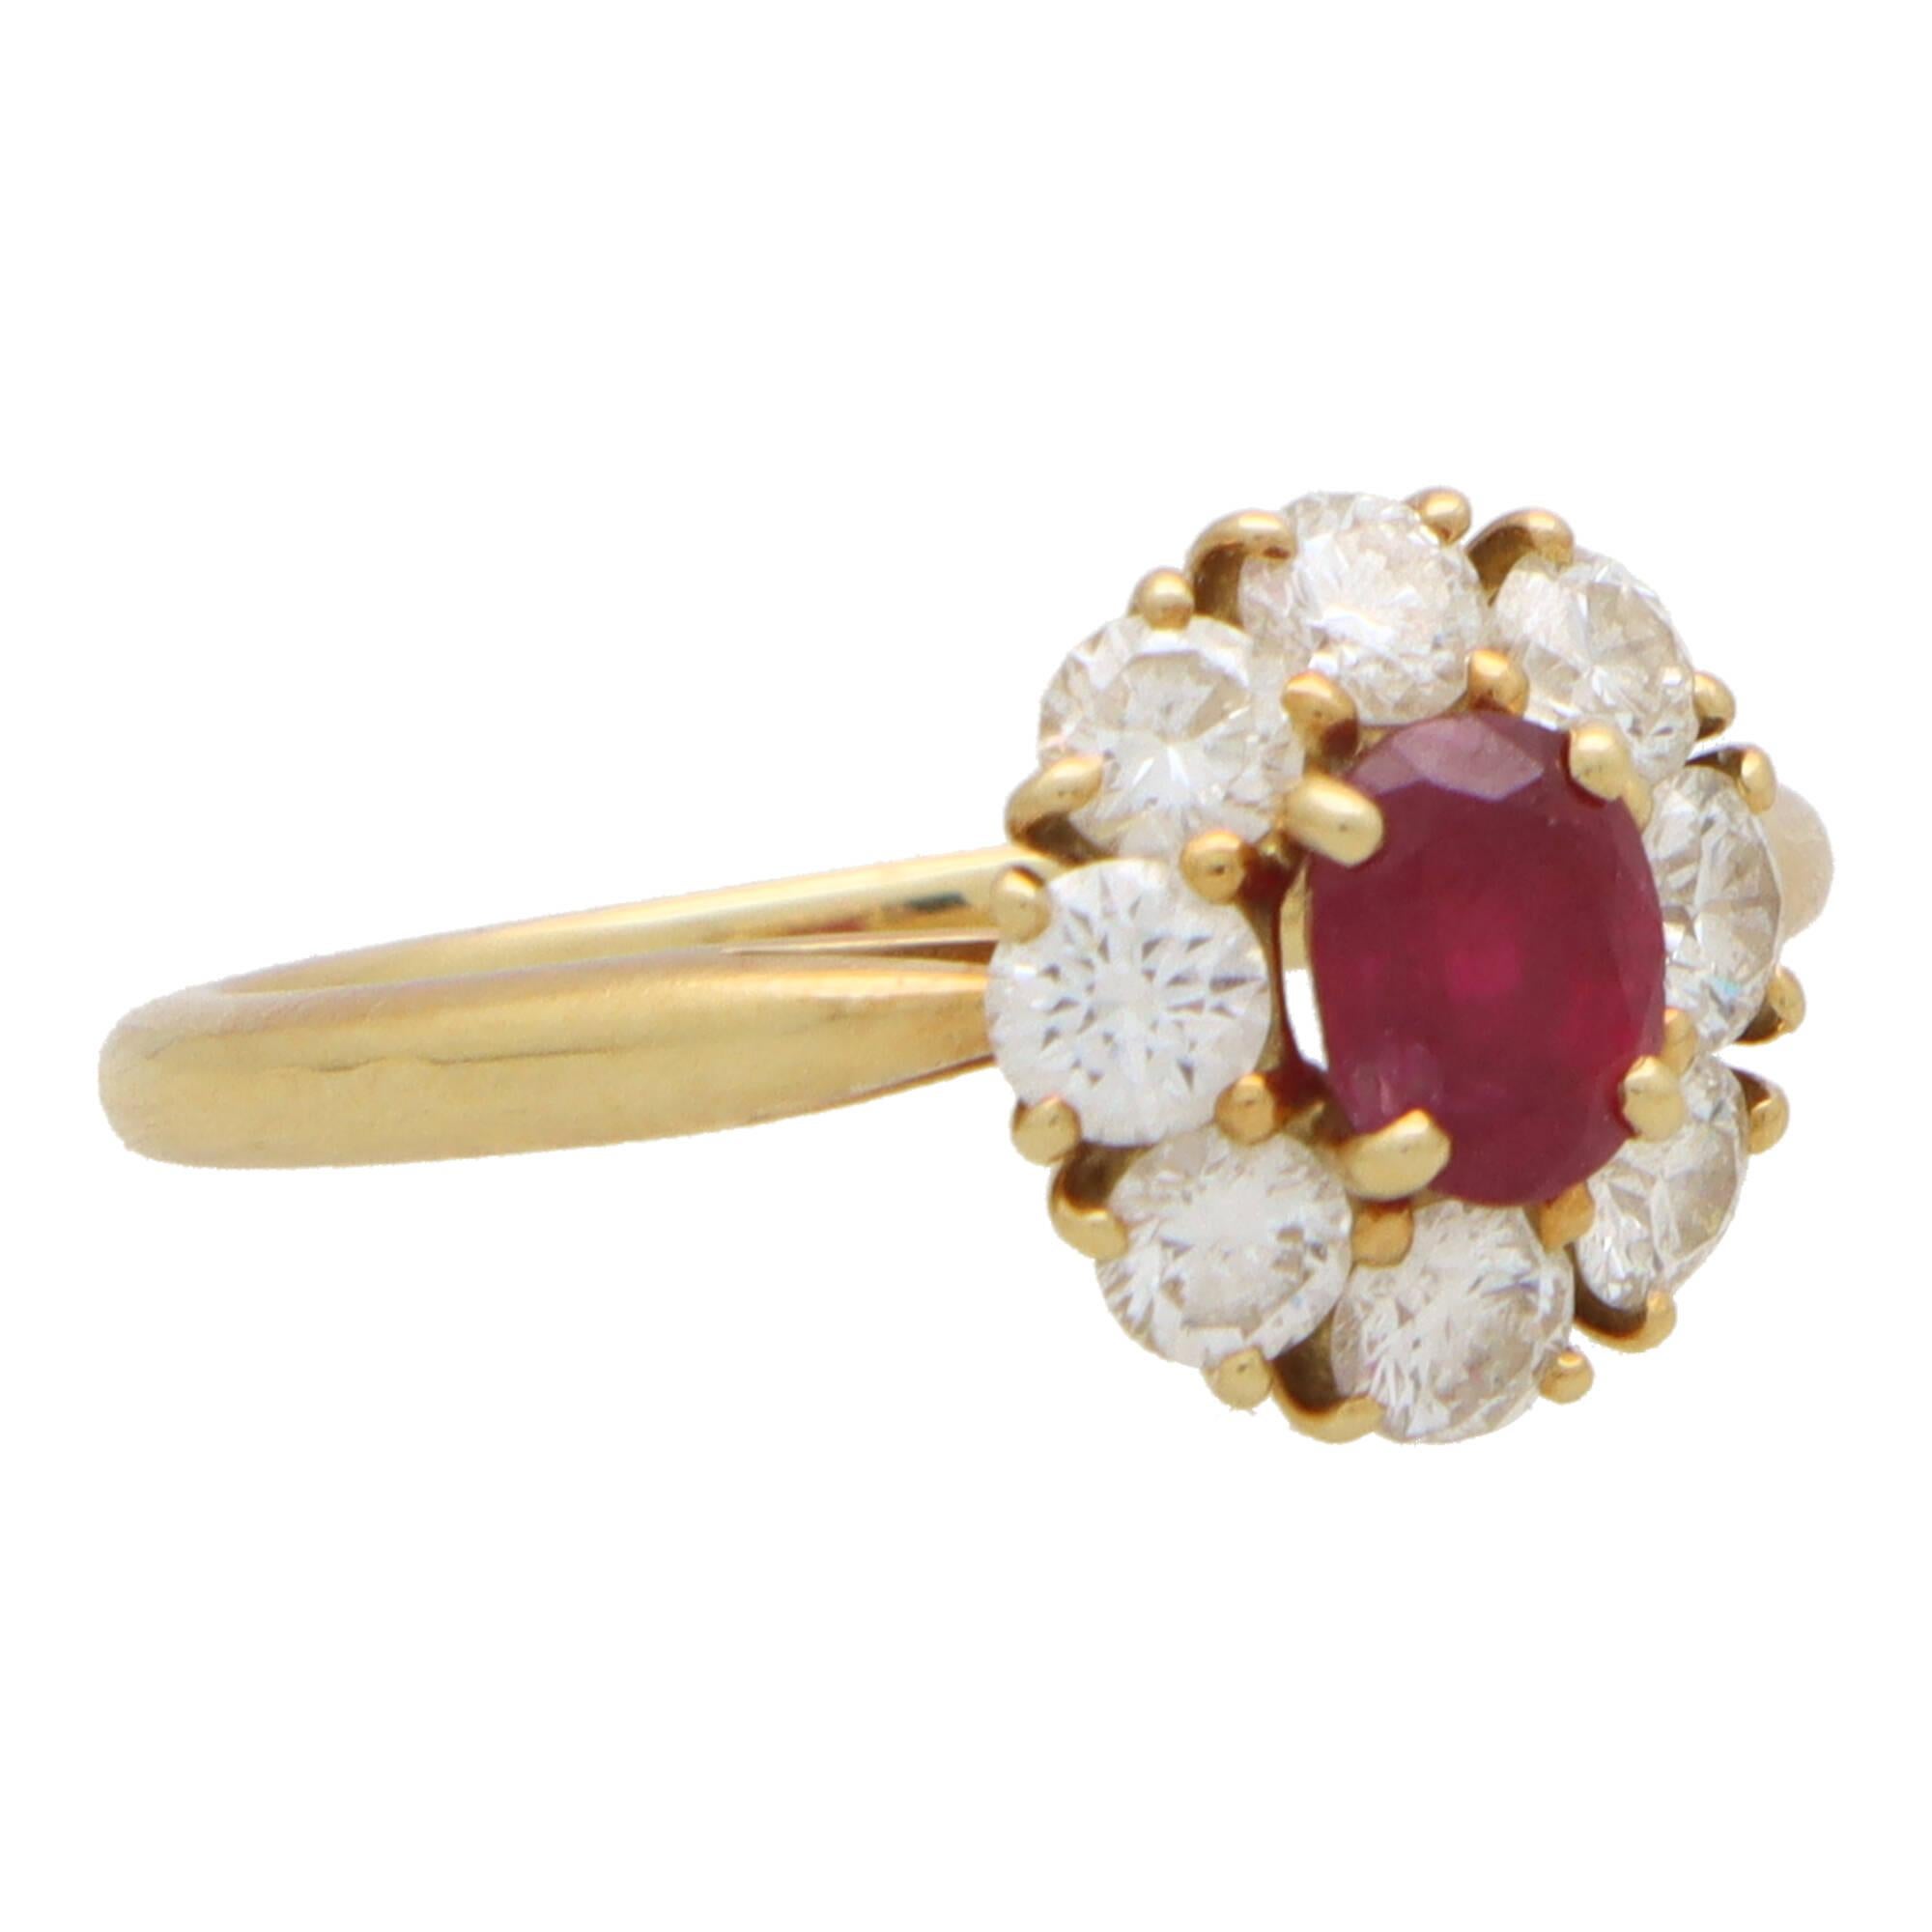 A beautiful vintage Cartier ruby and diamond cluster ring set in 18k yellow gold.

The piece is centrally set with a vibrant oval cut ruby which is four-claw set securely. The ruby has a fantastic colouring to it and is surrounded by a cluster of 8